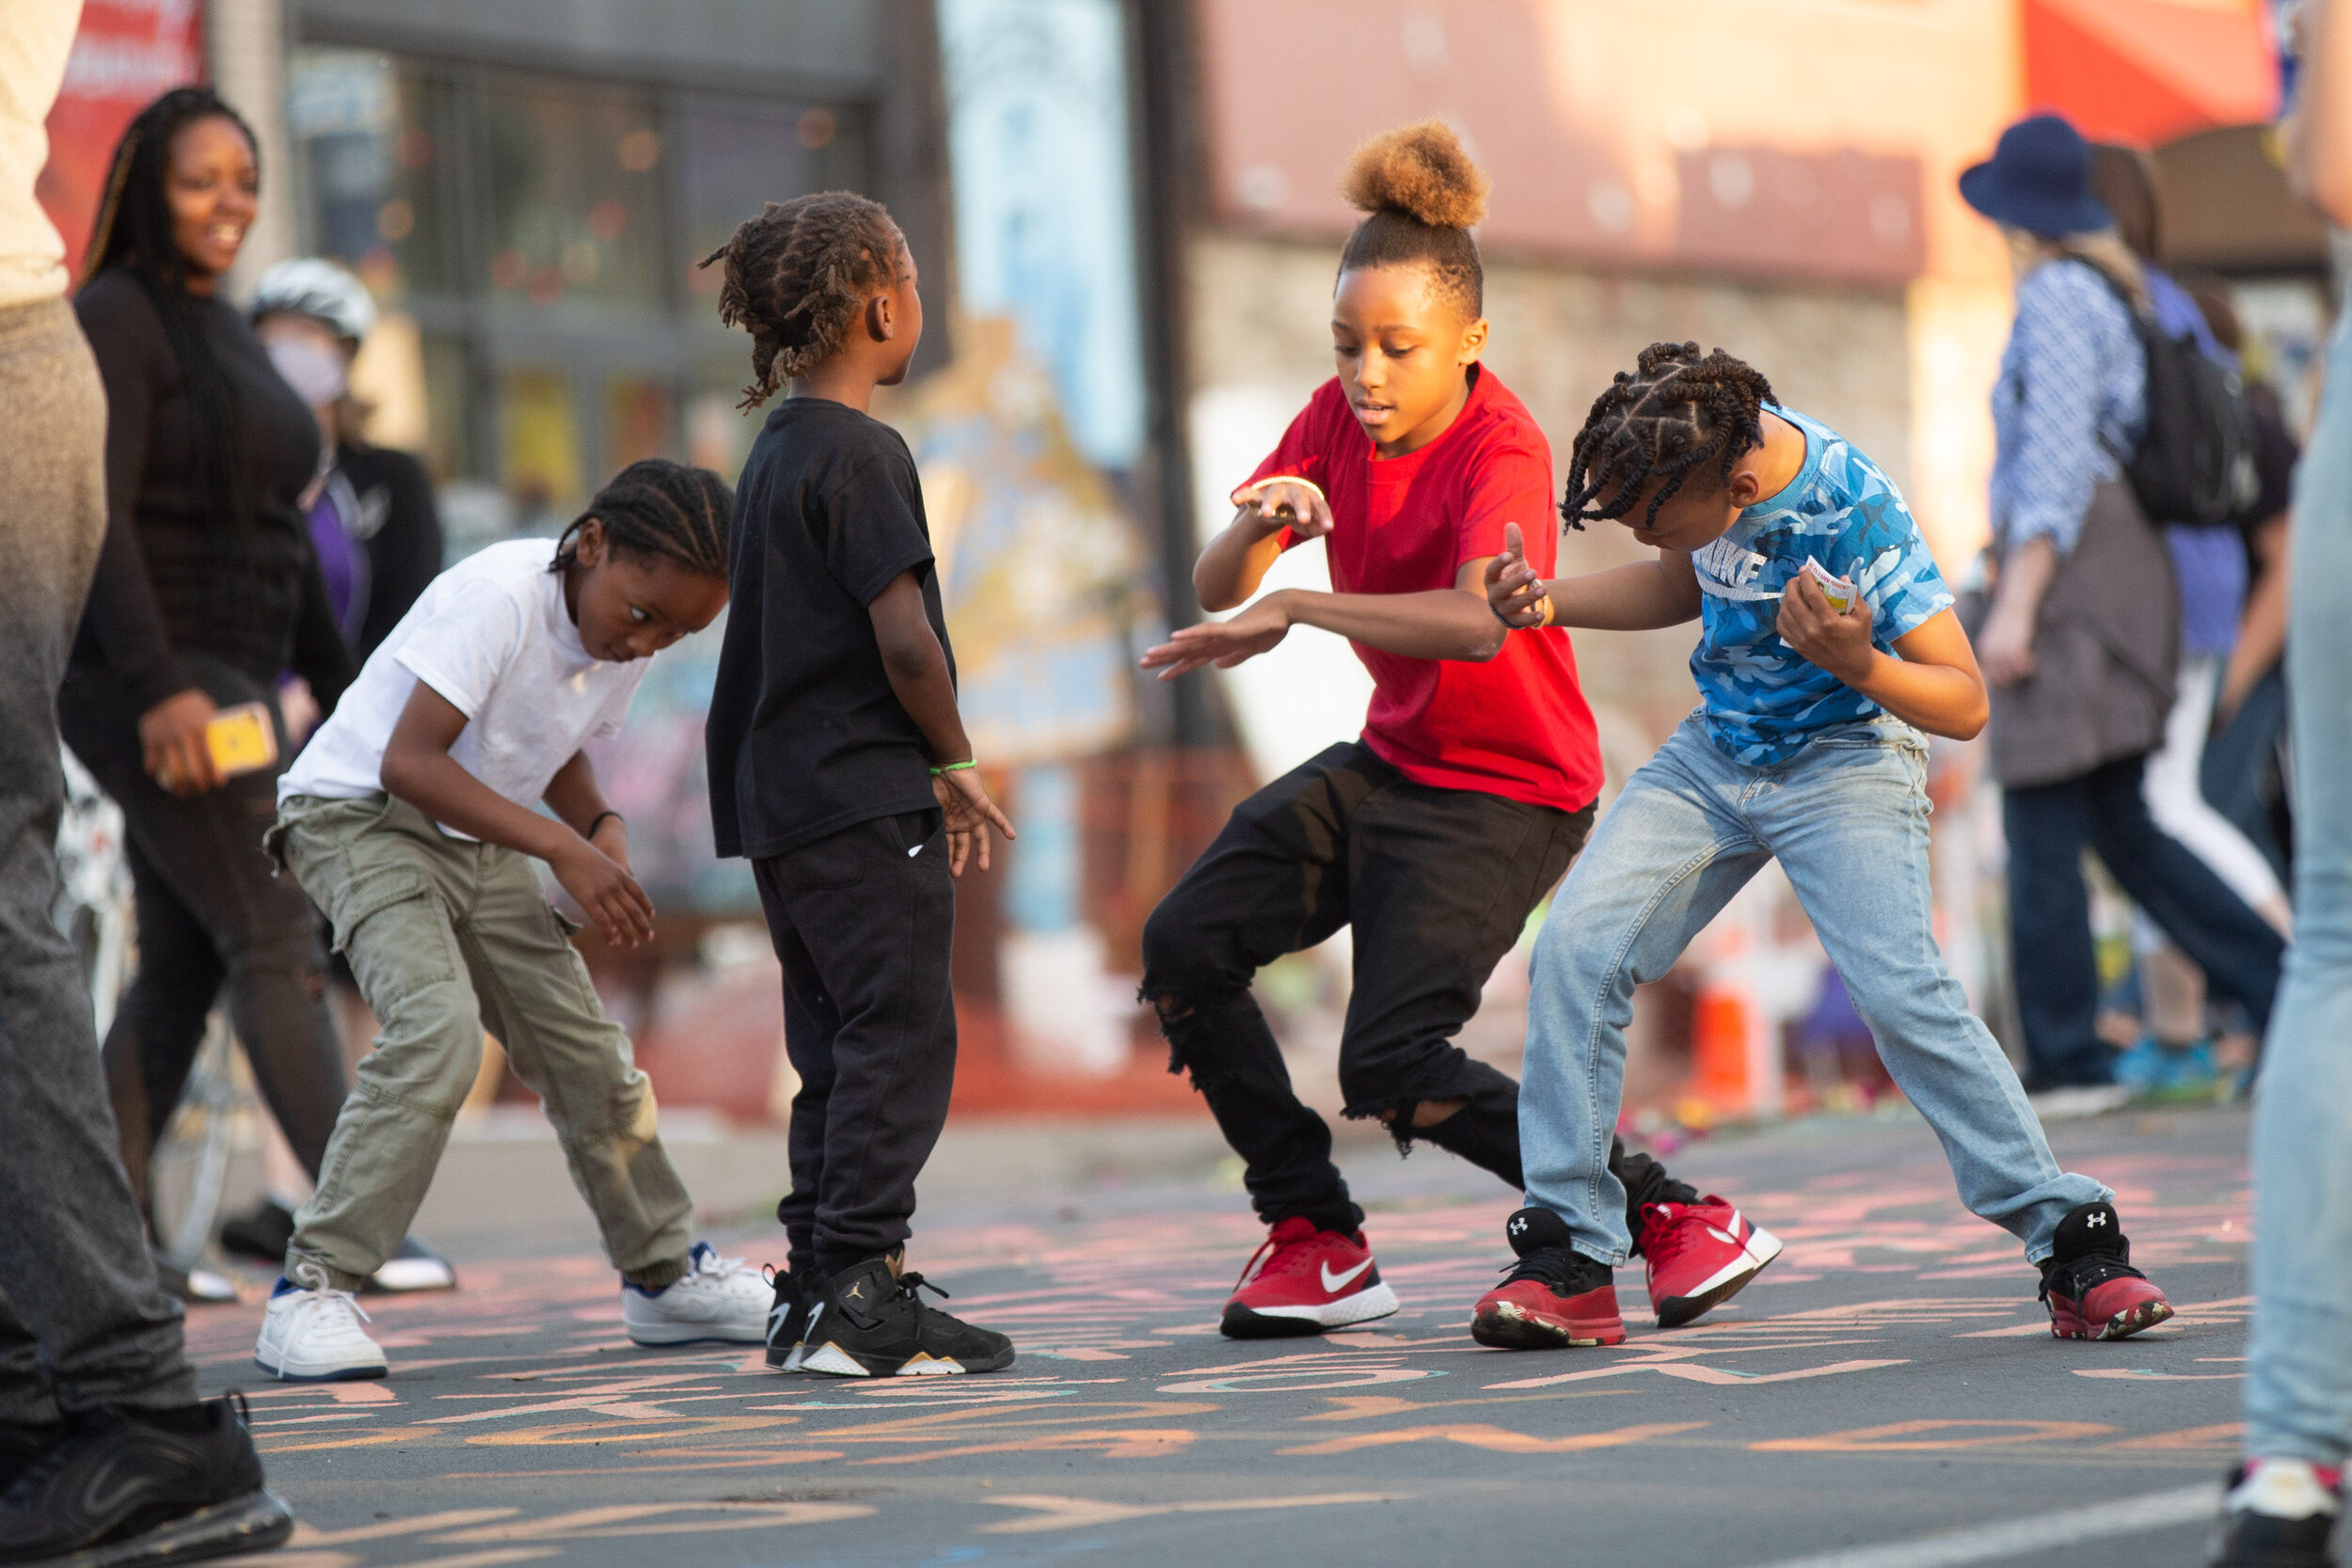  Children dance on the street at 38th and Chicago Ave at the memorial site for George Floyd who was killed by police on Jun 13, 2020 in Minneapolis, Minnesota. 